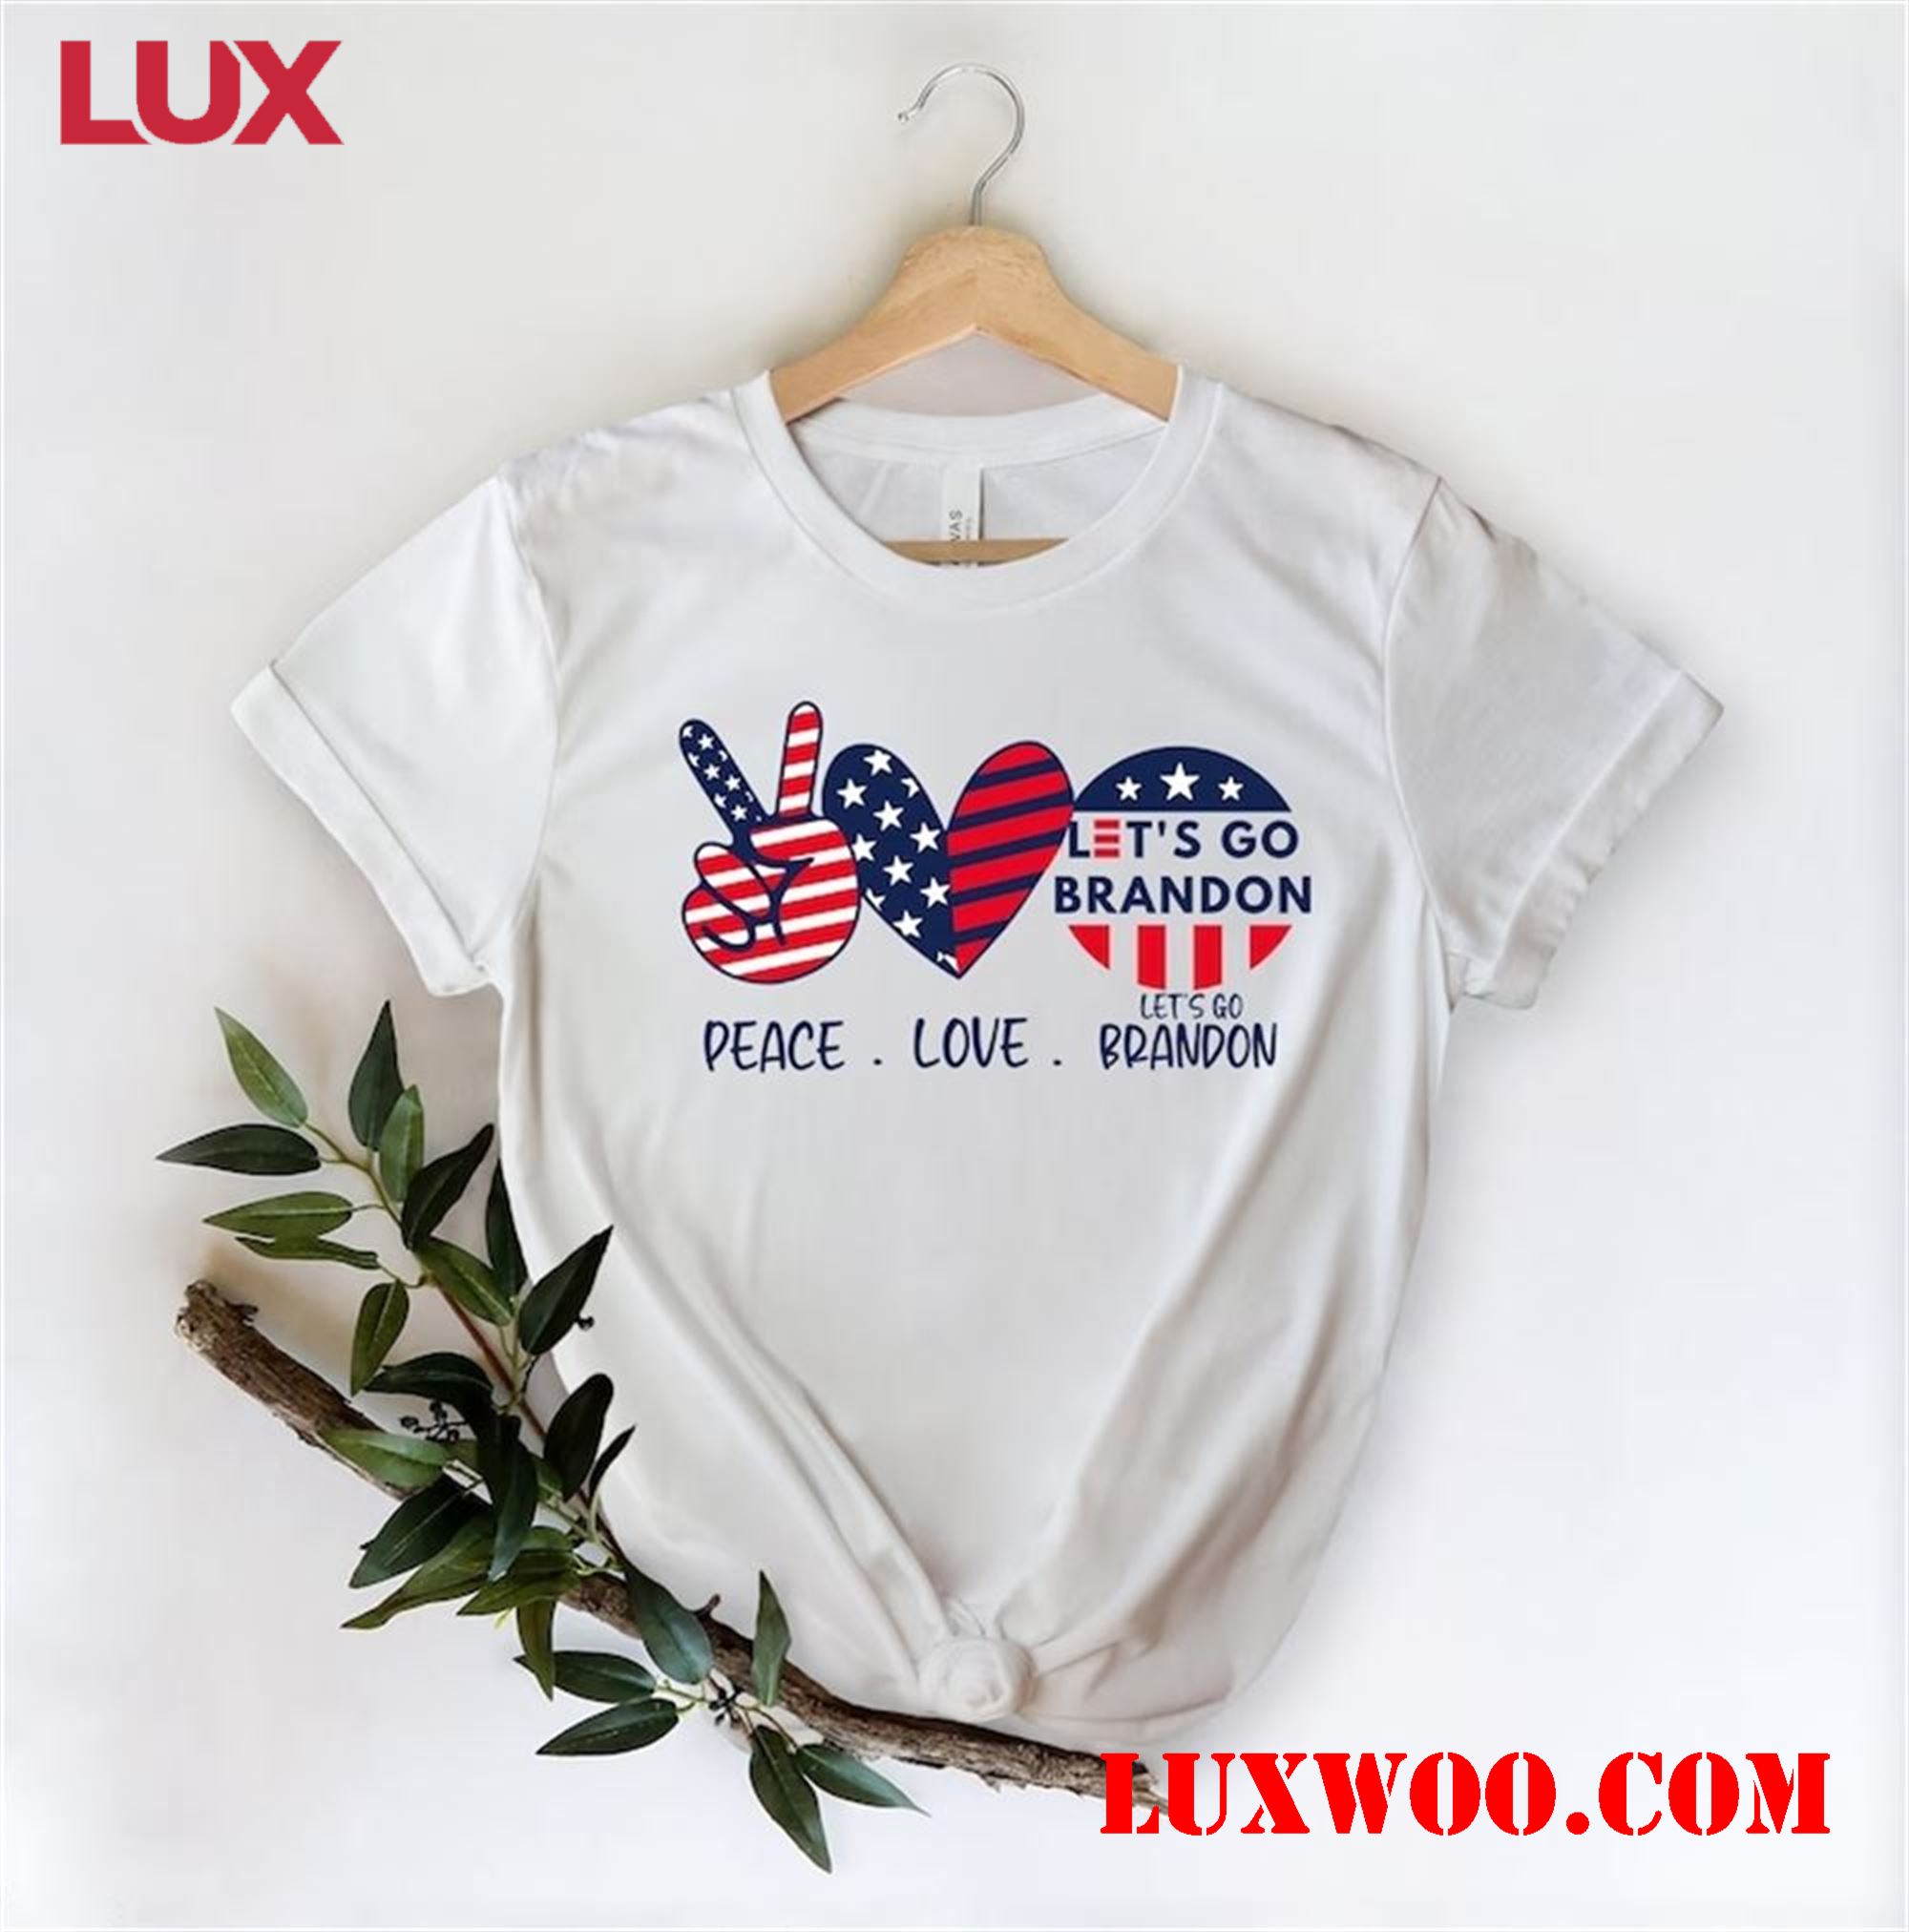 Spread Love And Peace With The Trendy Brandon Shirt